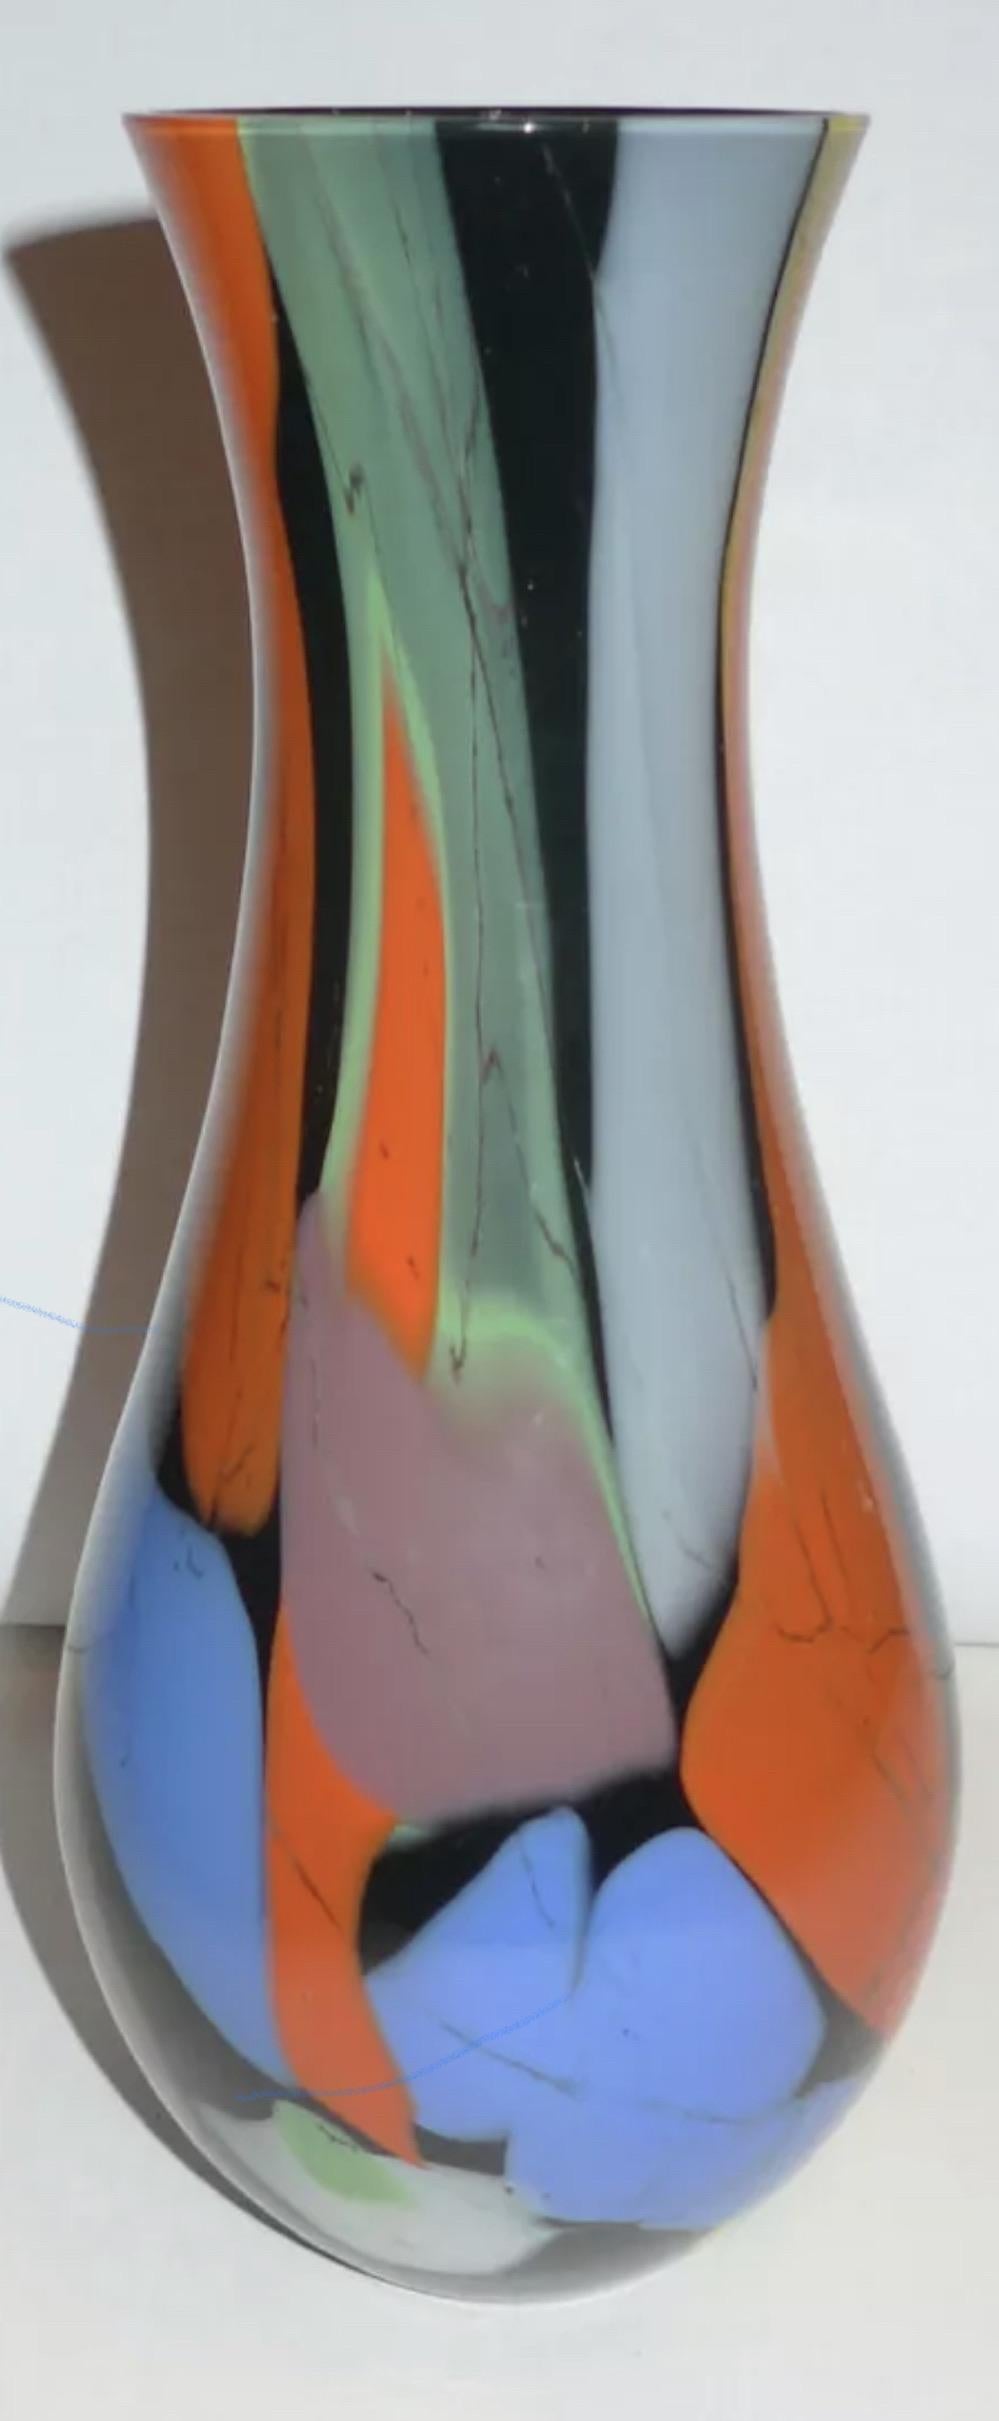 Vintage Murano art glass signed Seguso multicolored vase, Italian midcentury. Signed. Measures: About 10-7/8